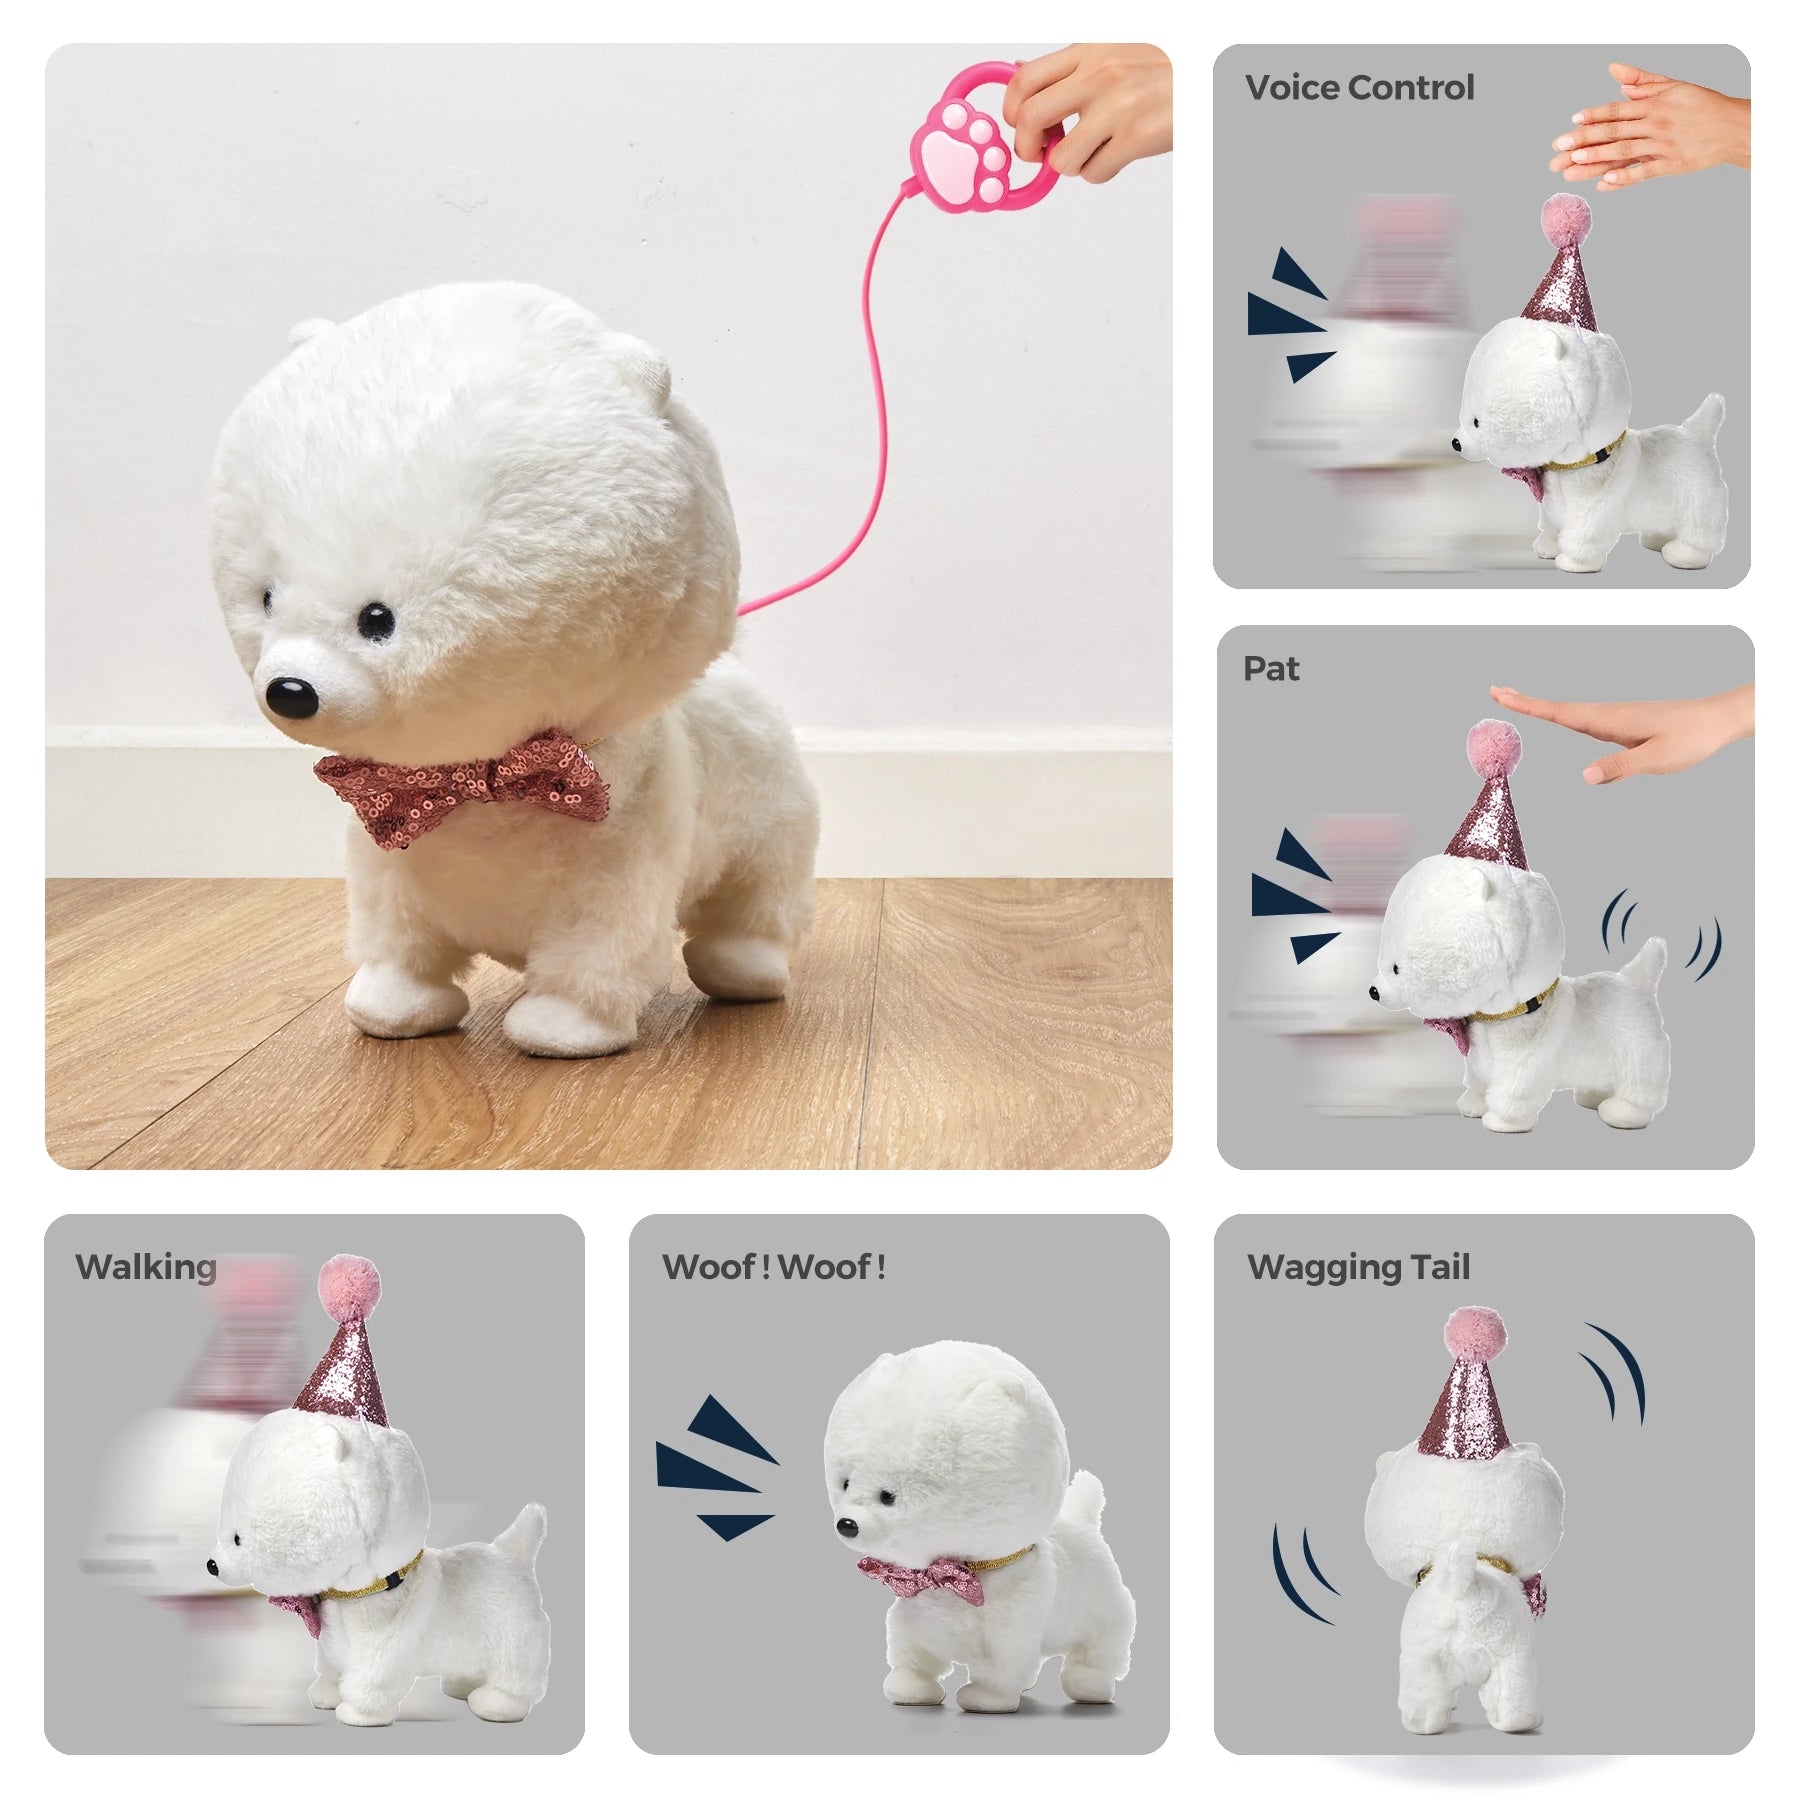 Walking and barking stuffed dog toy with remote and voice control